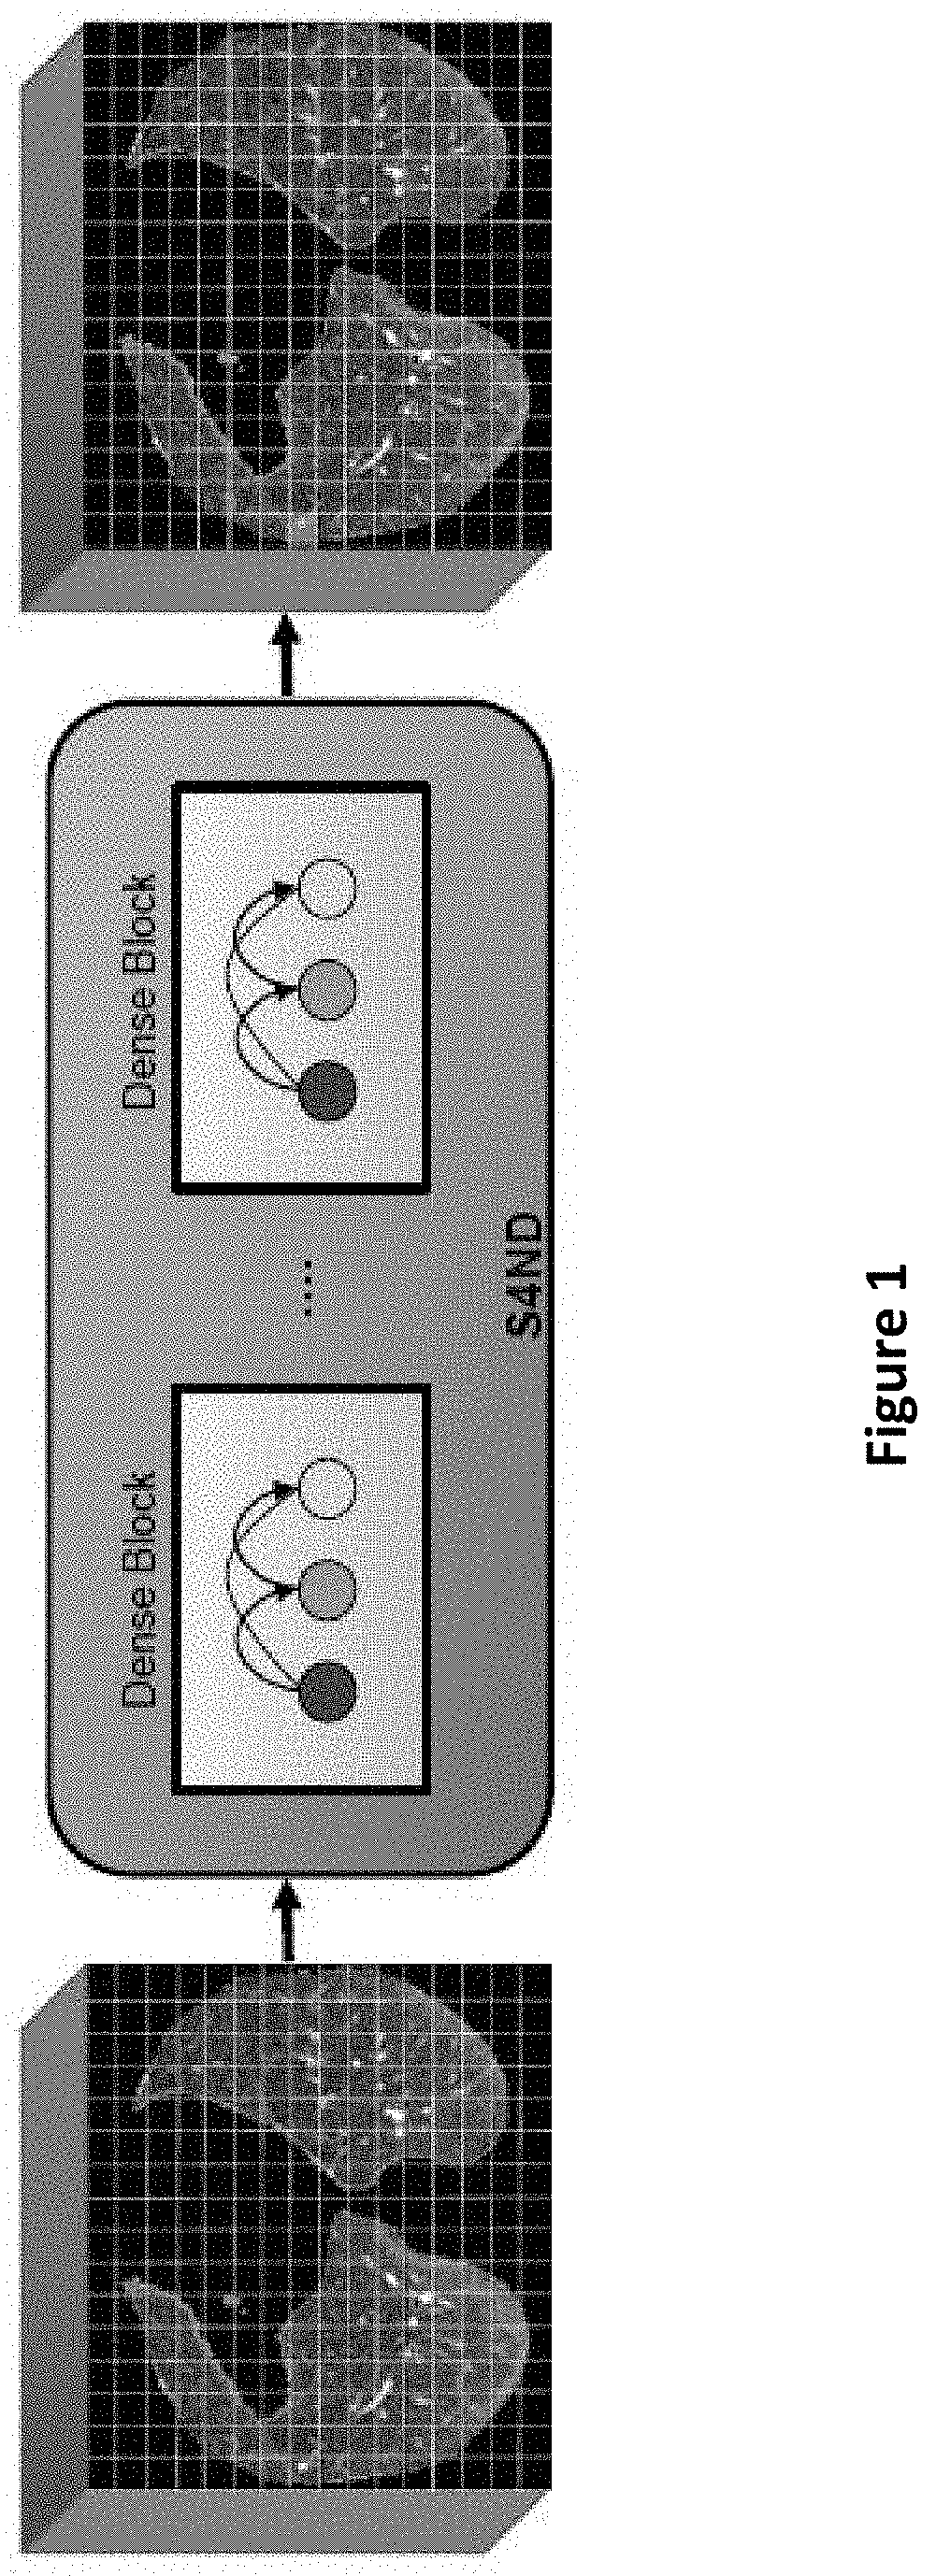 Method for detection and diagnosis of lung and pancreatic cancers from imaging scans